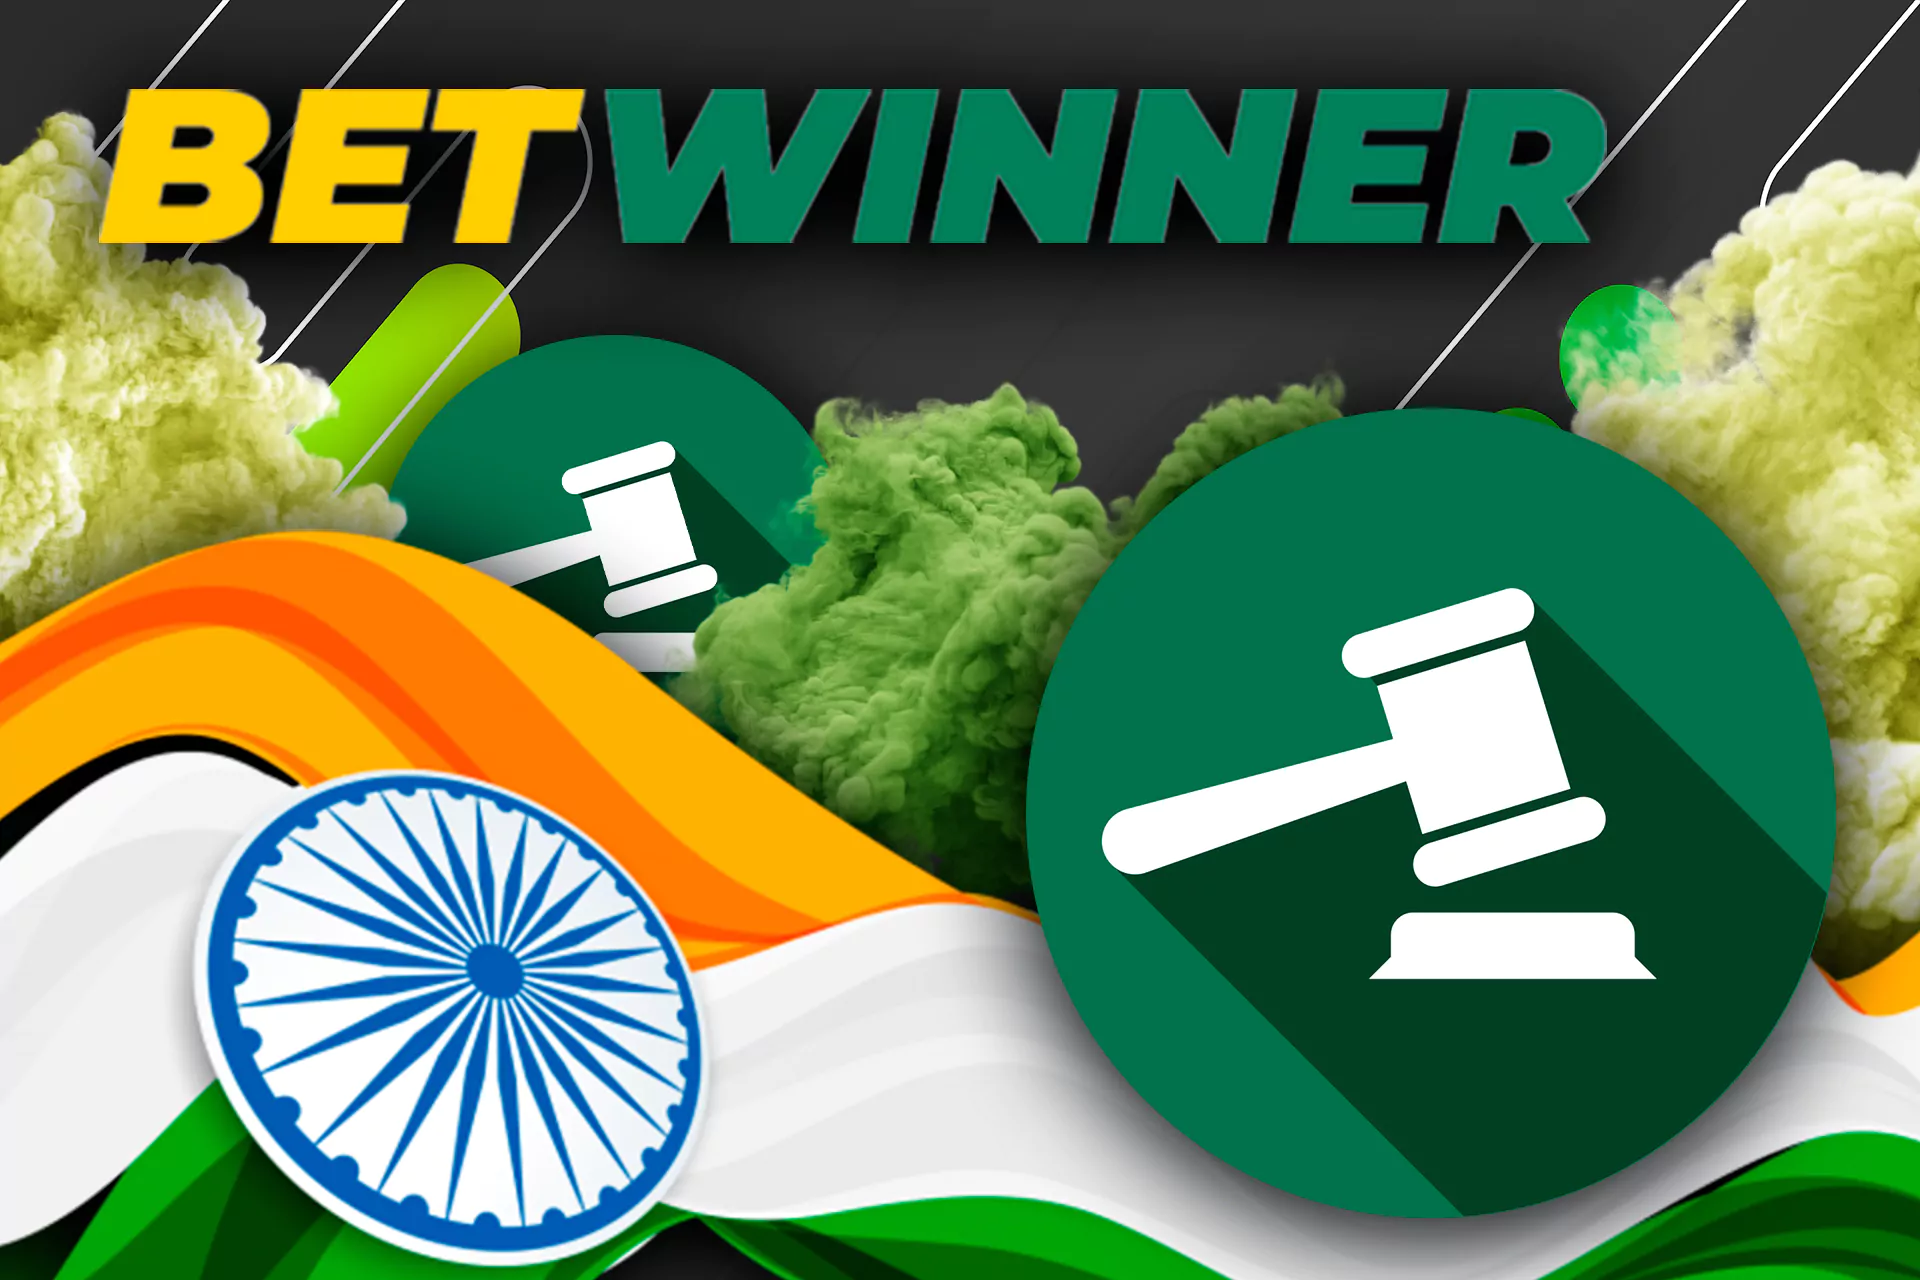 It's absolutely legal to bet at Betwinner in India.